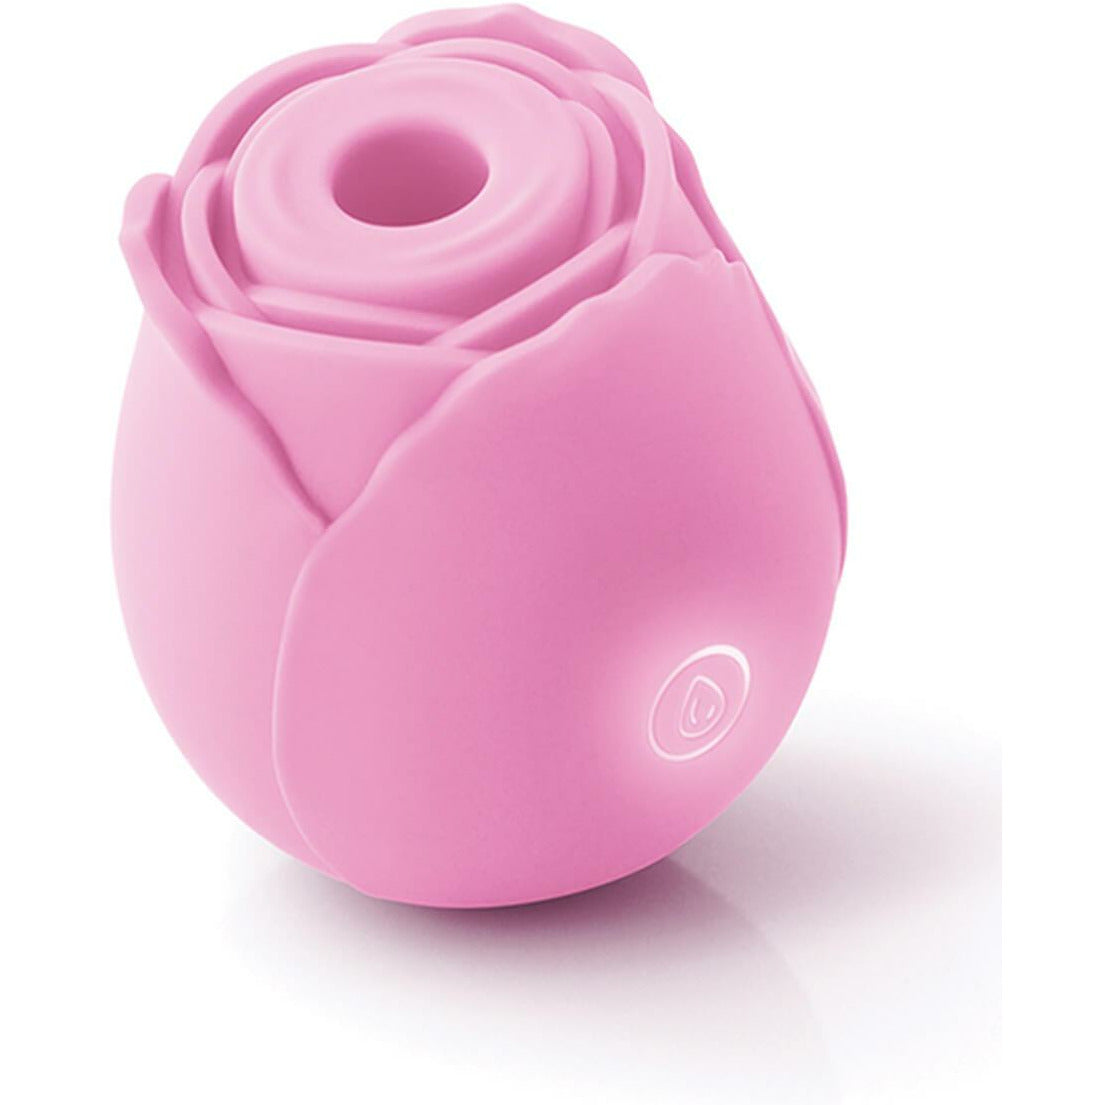 Petal to the Metal Rose Suction Vibe in pink - Voodoo Toys - by The Bigger O an online sex toy shop. We ship to USA, Canada and the UK